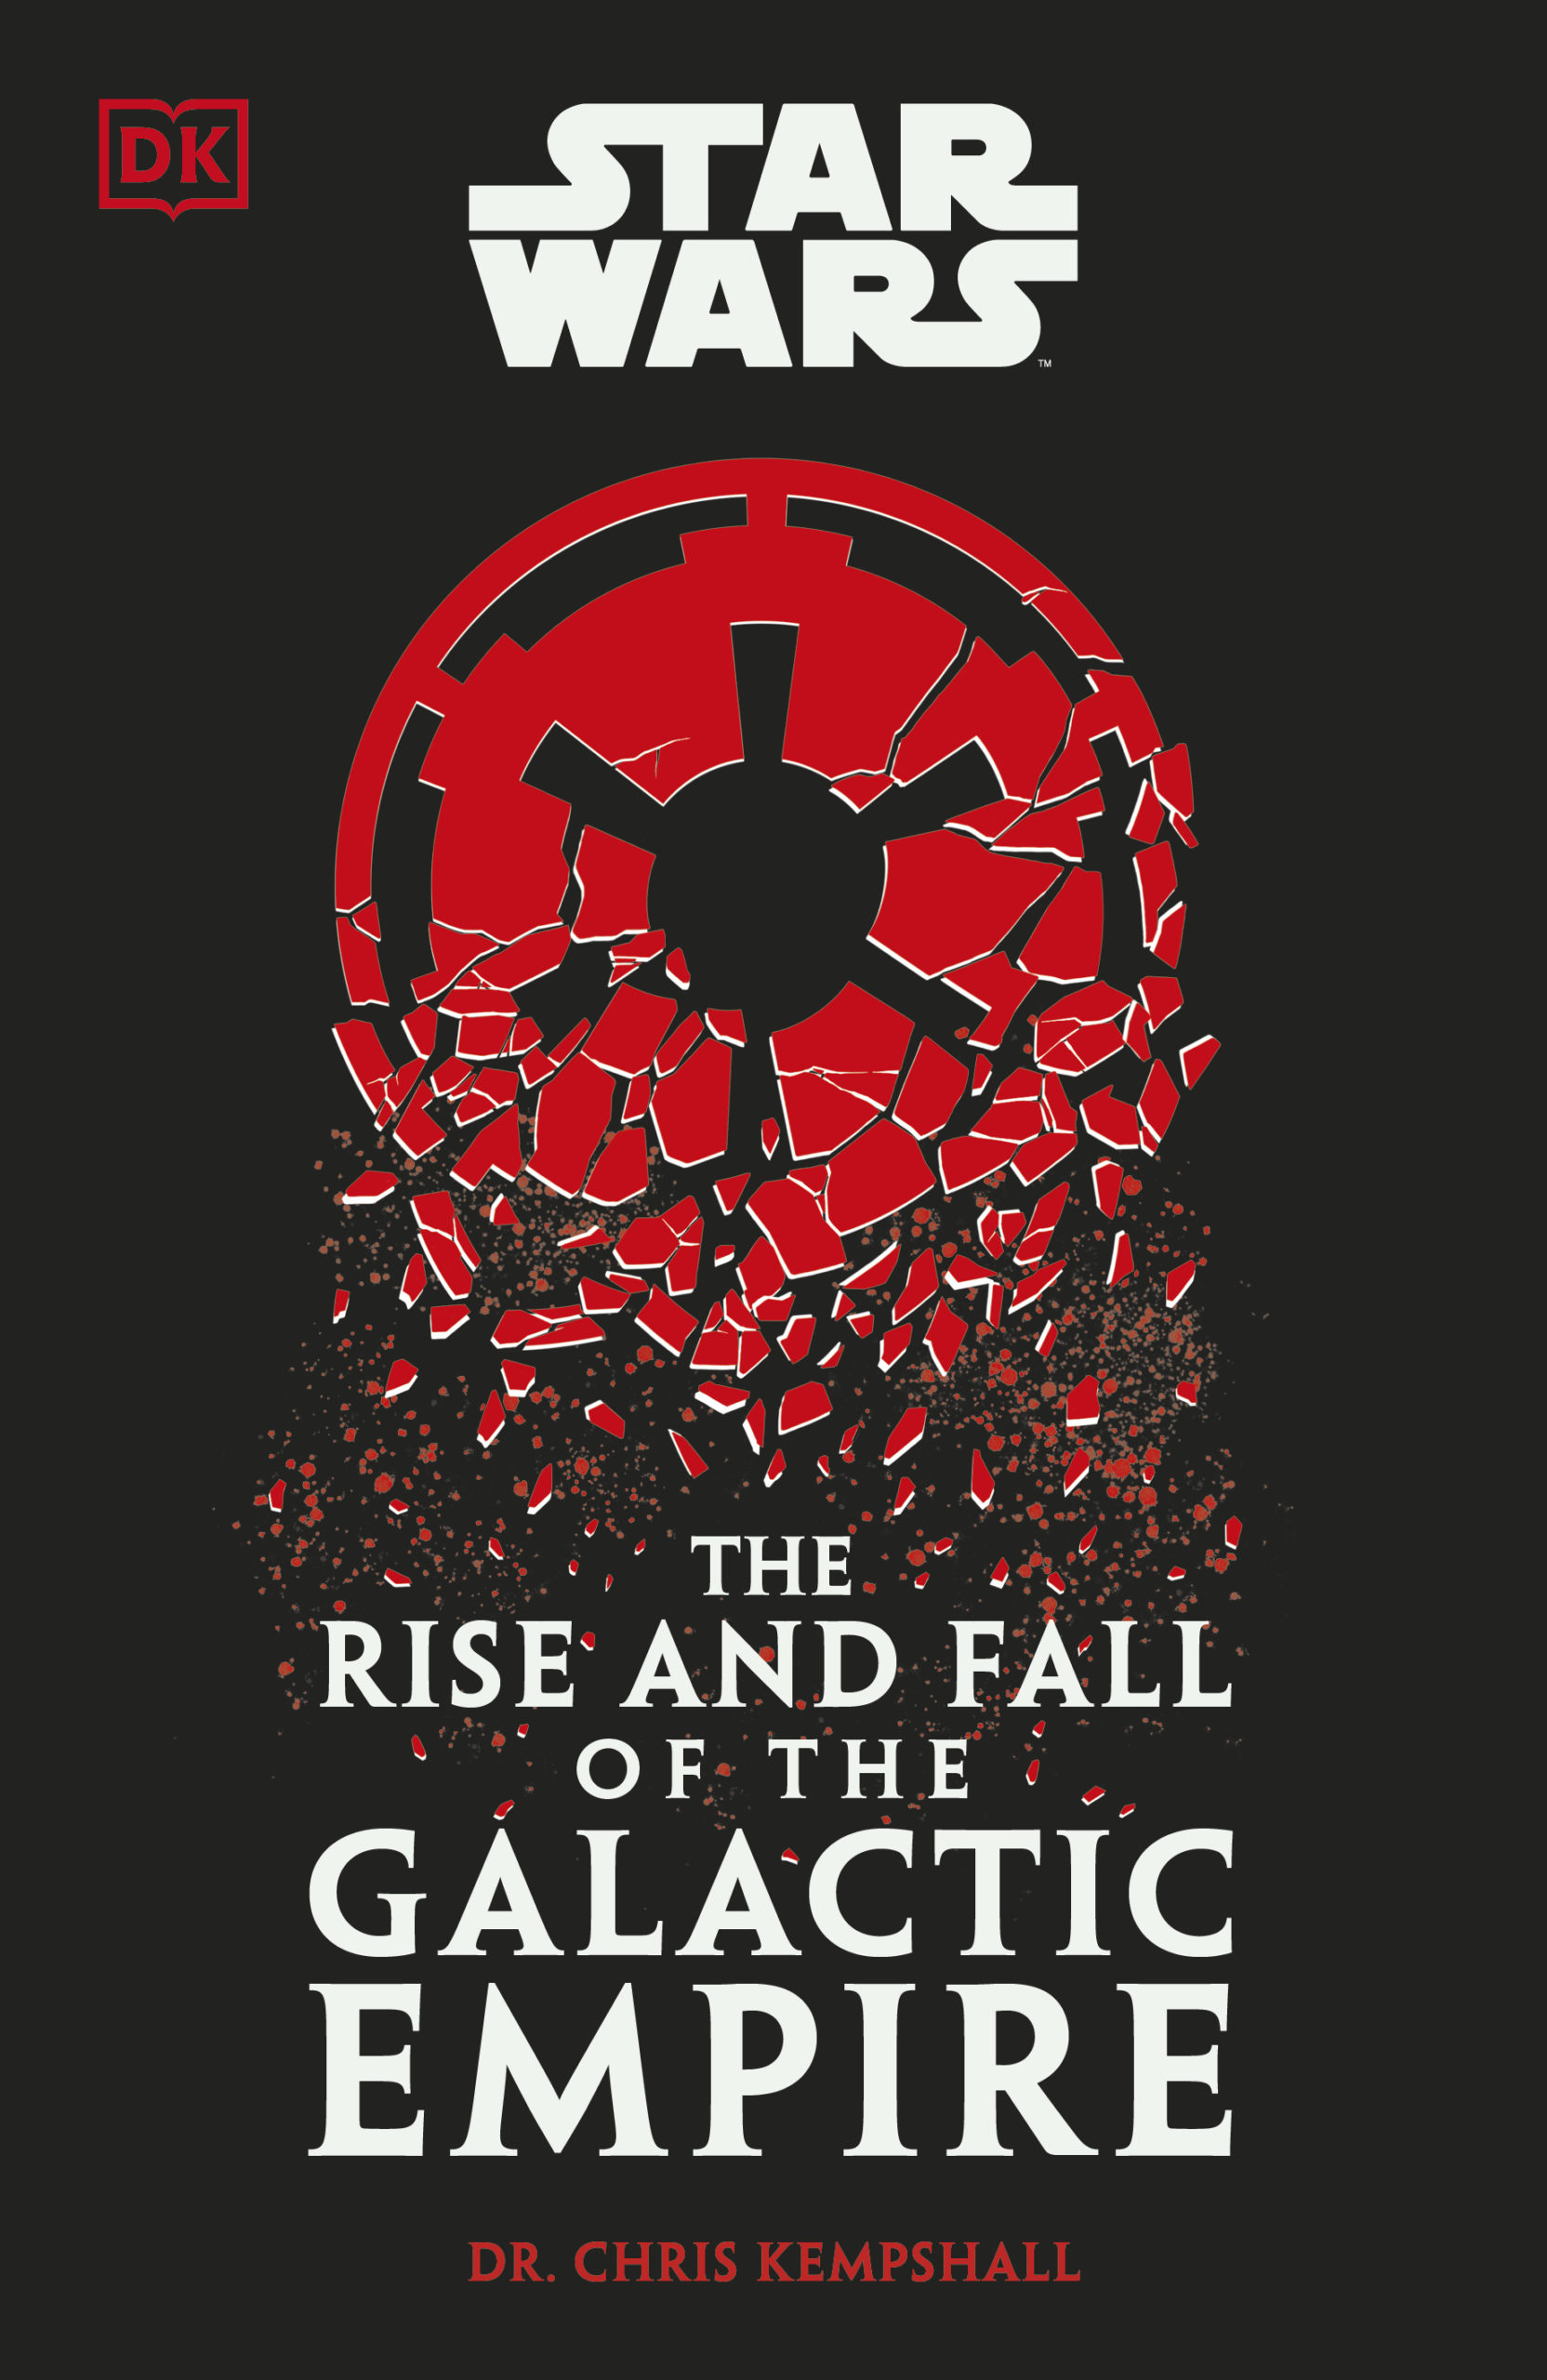 Star Wars: The Rise and Fall of the Galactic Empire